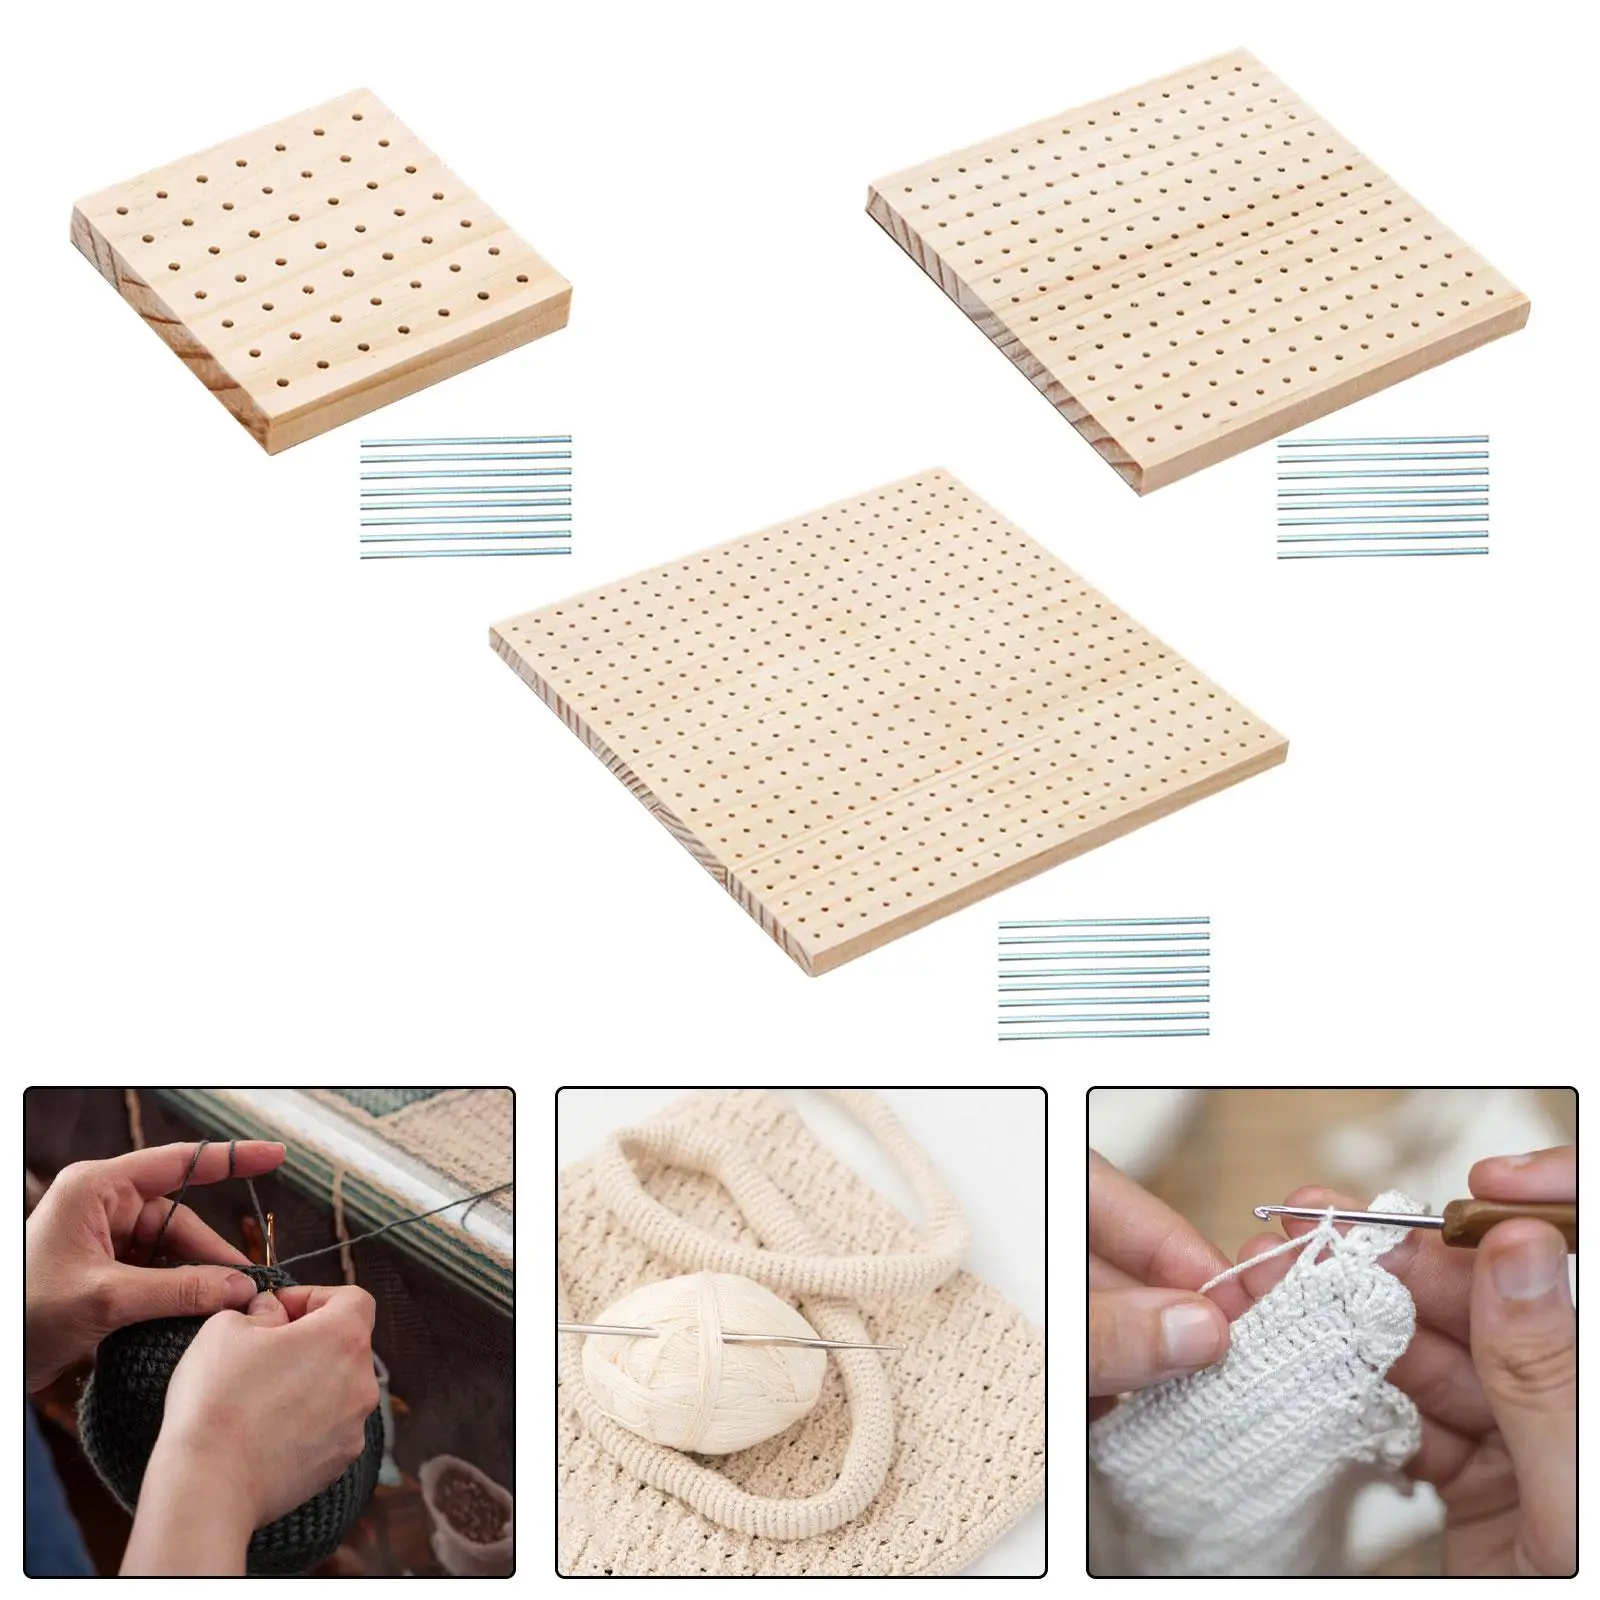 Wooden Crochet Blocking Boards Wooden Board with 8 Stainless Steel Rod Pins for Granny Squares Mother Crochet Projects Beginners